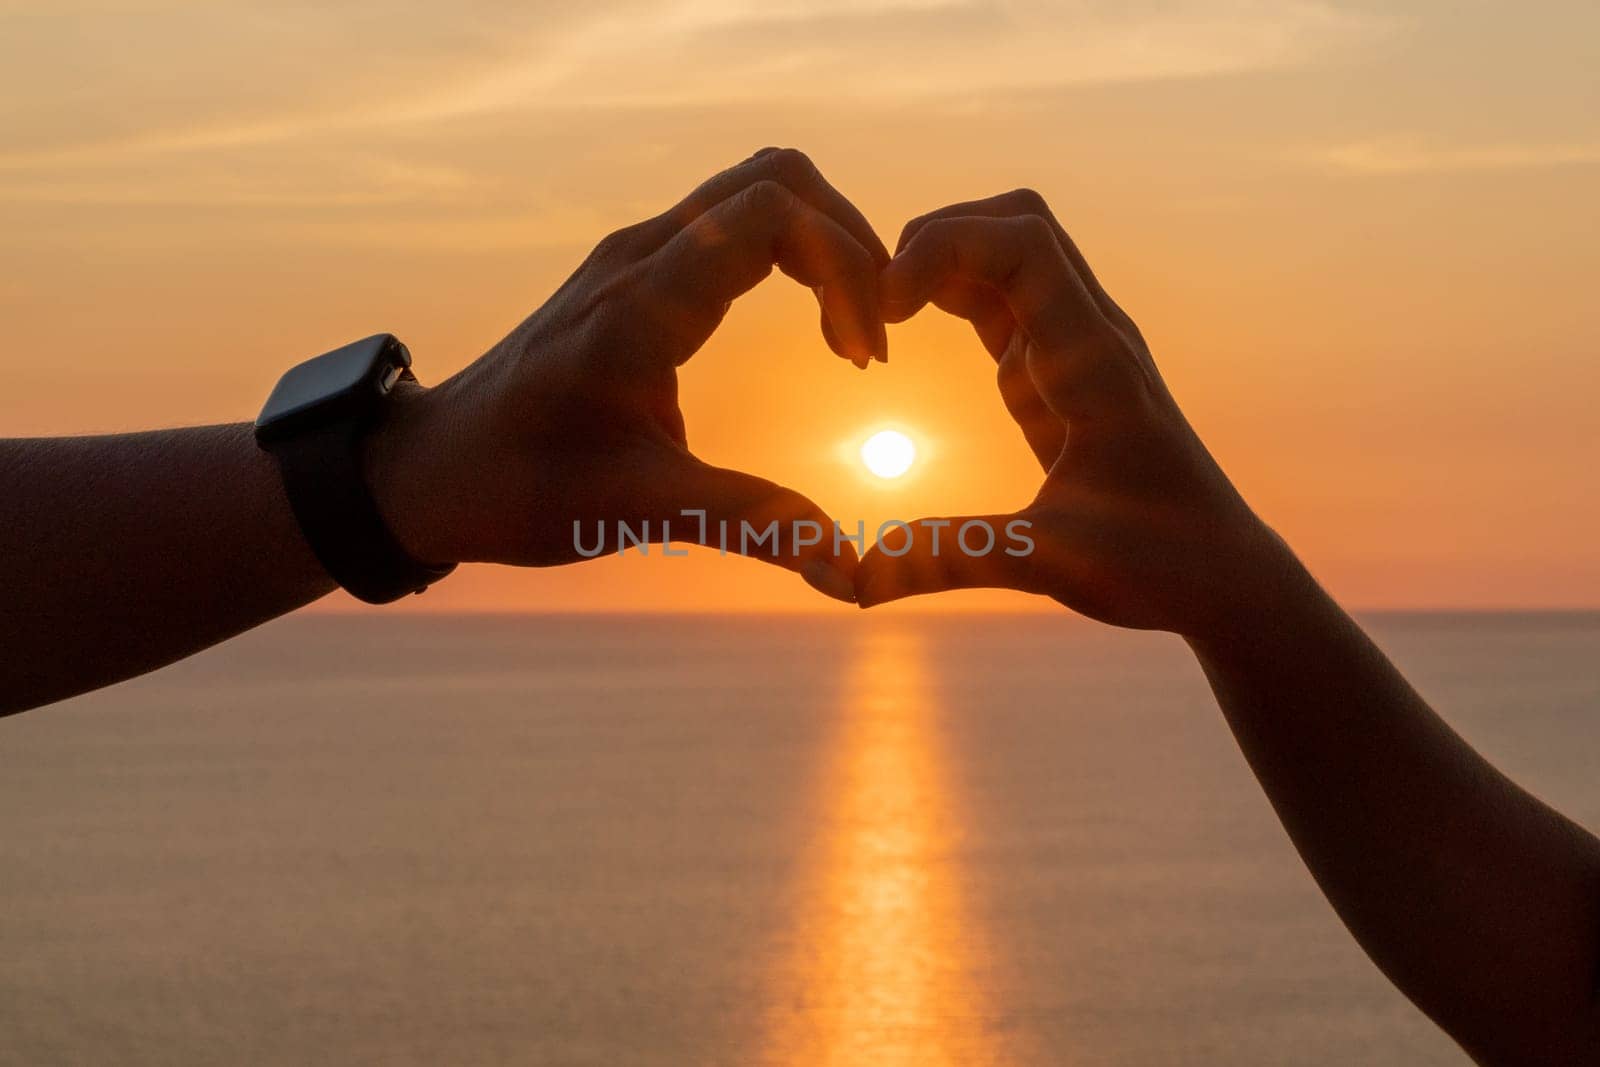 Hands heart sea sanset. The image features a beautiful sunset with two people holding their hands up in the air, forming a heart shape. by Matiunina